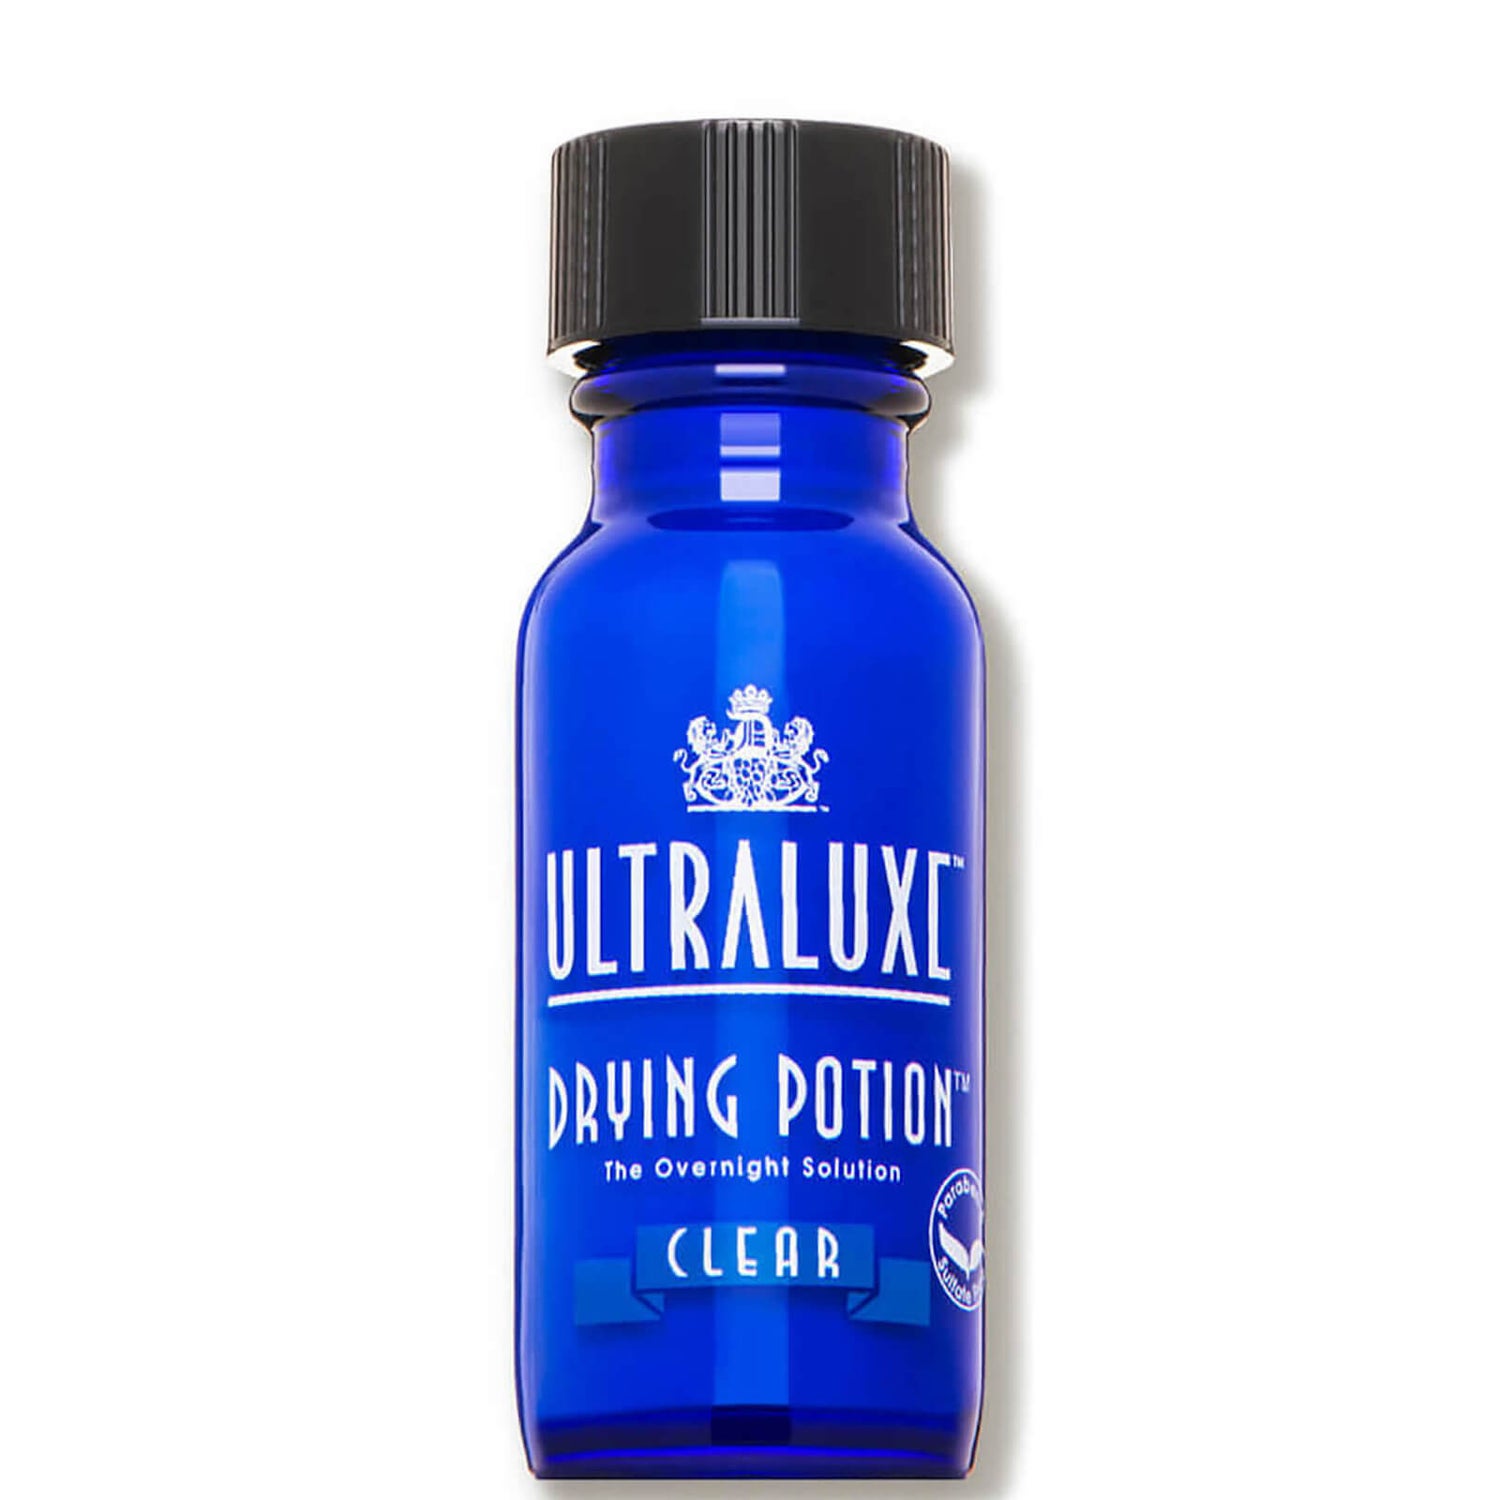 UltraLuxe Drying Potion (0.5 fl. oz.)